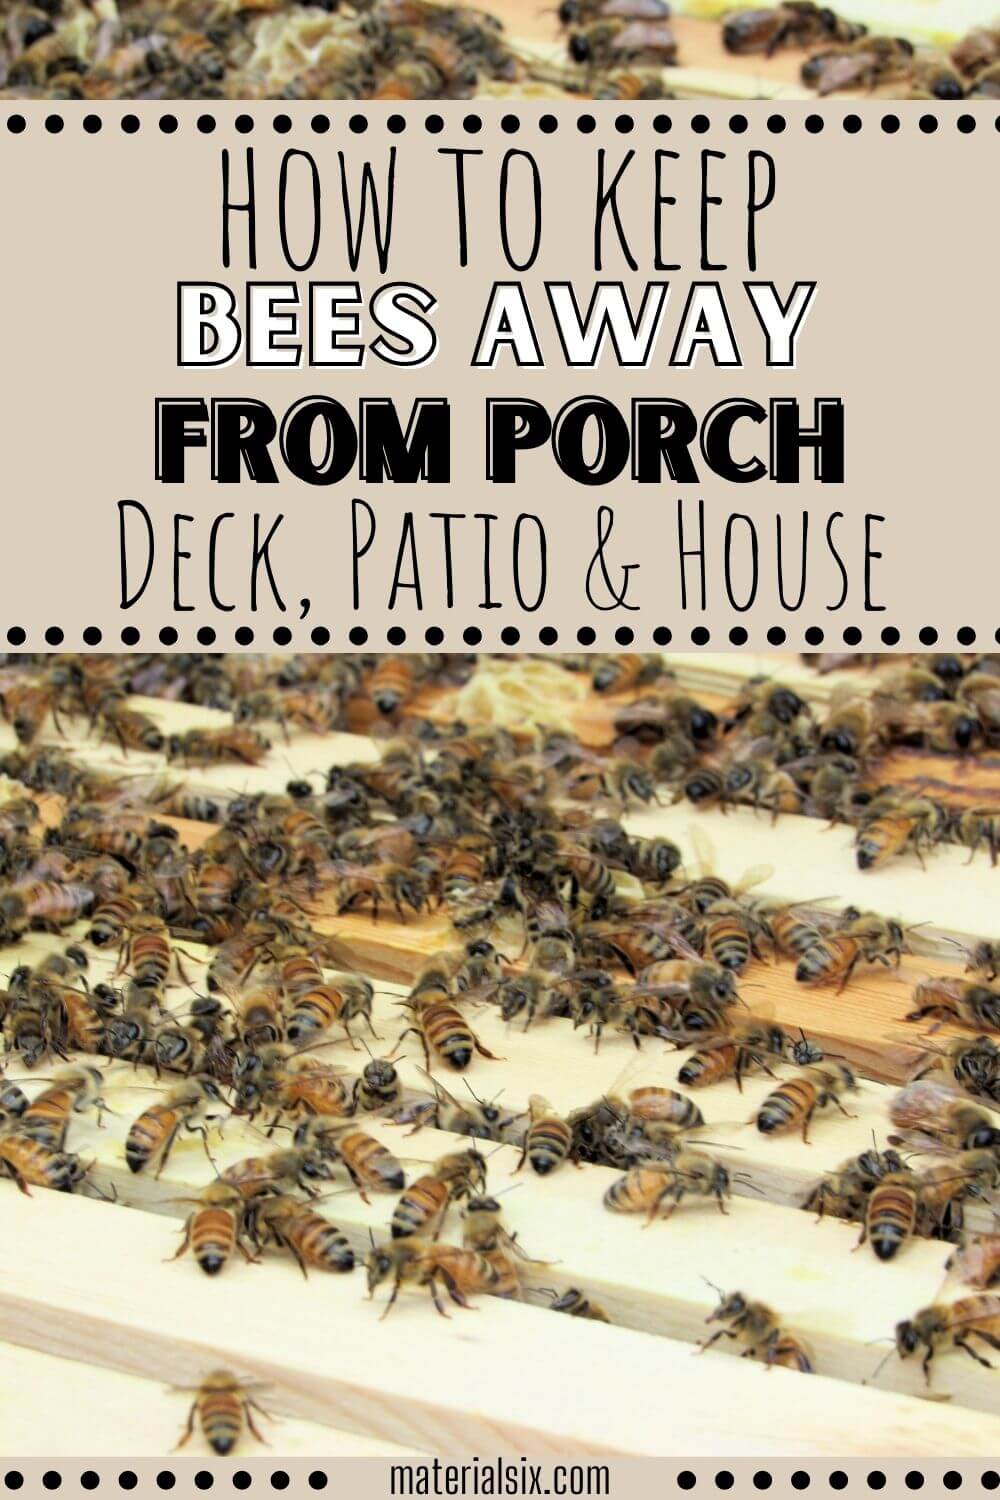 How to Keep Bees Away From Porch